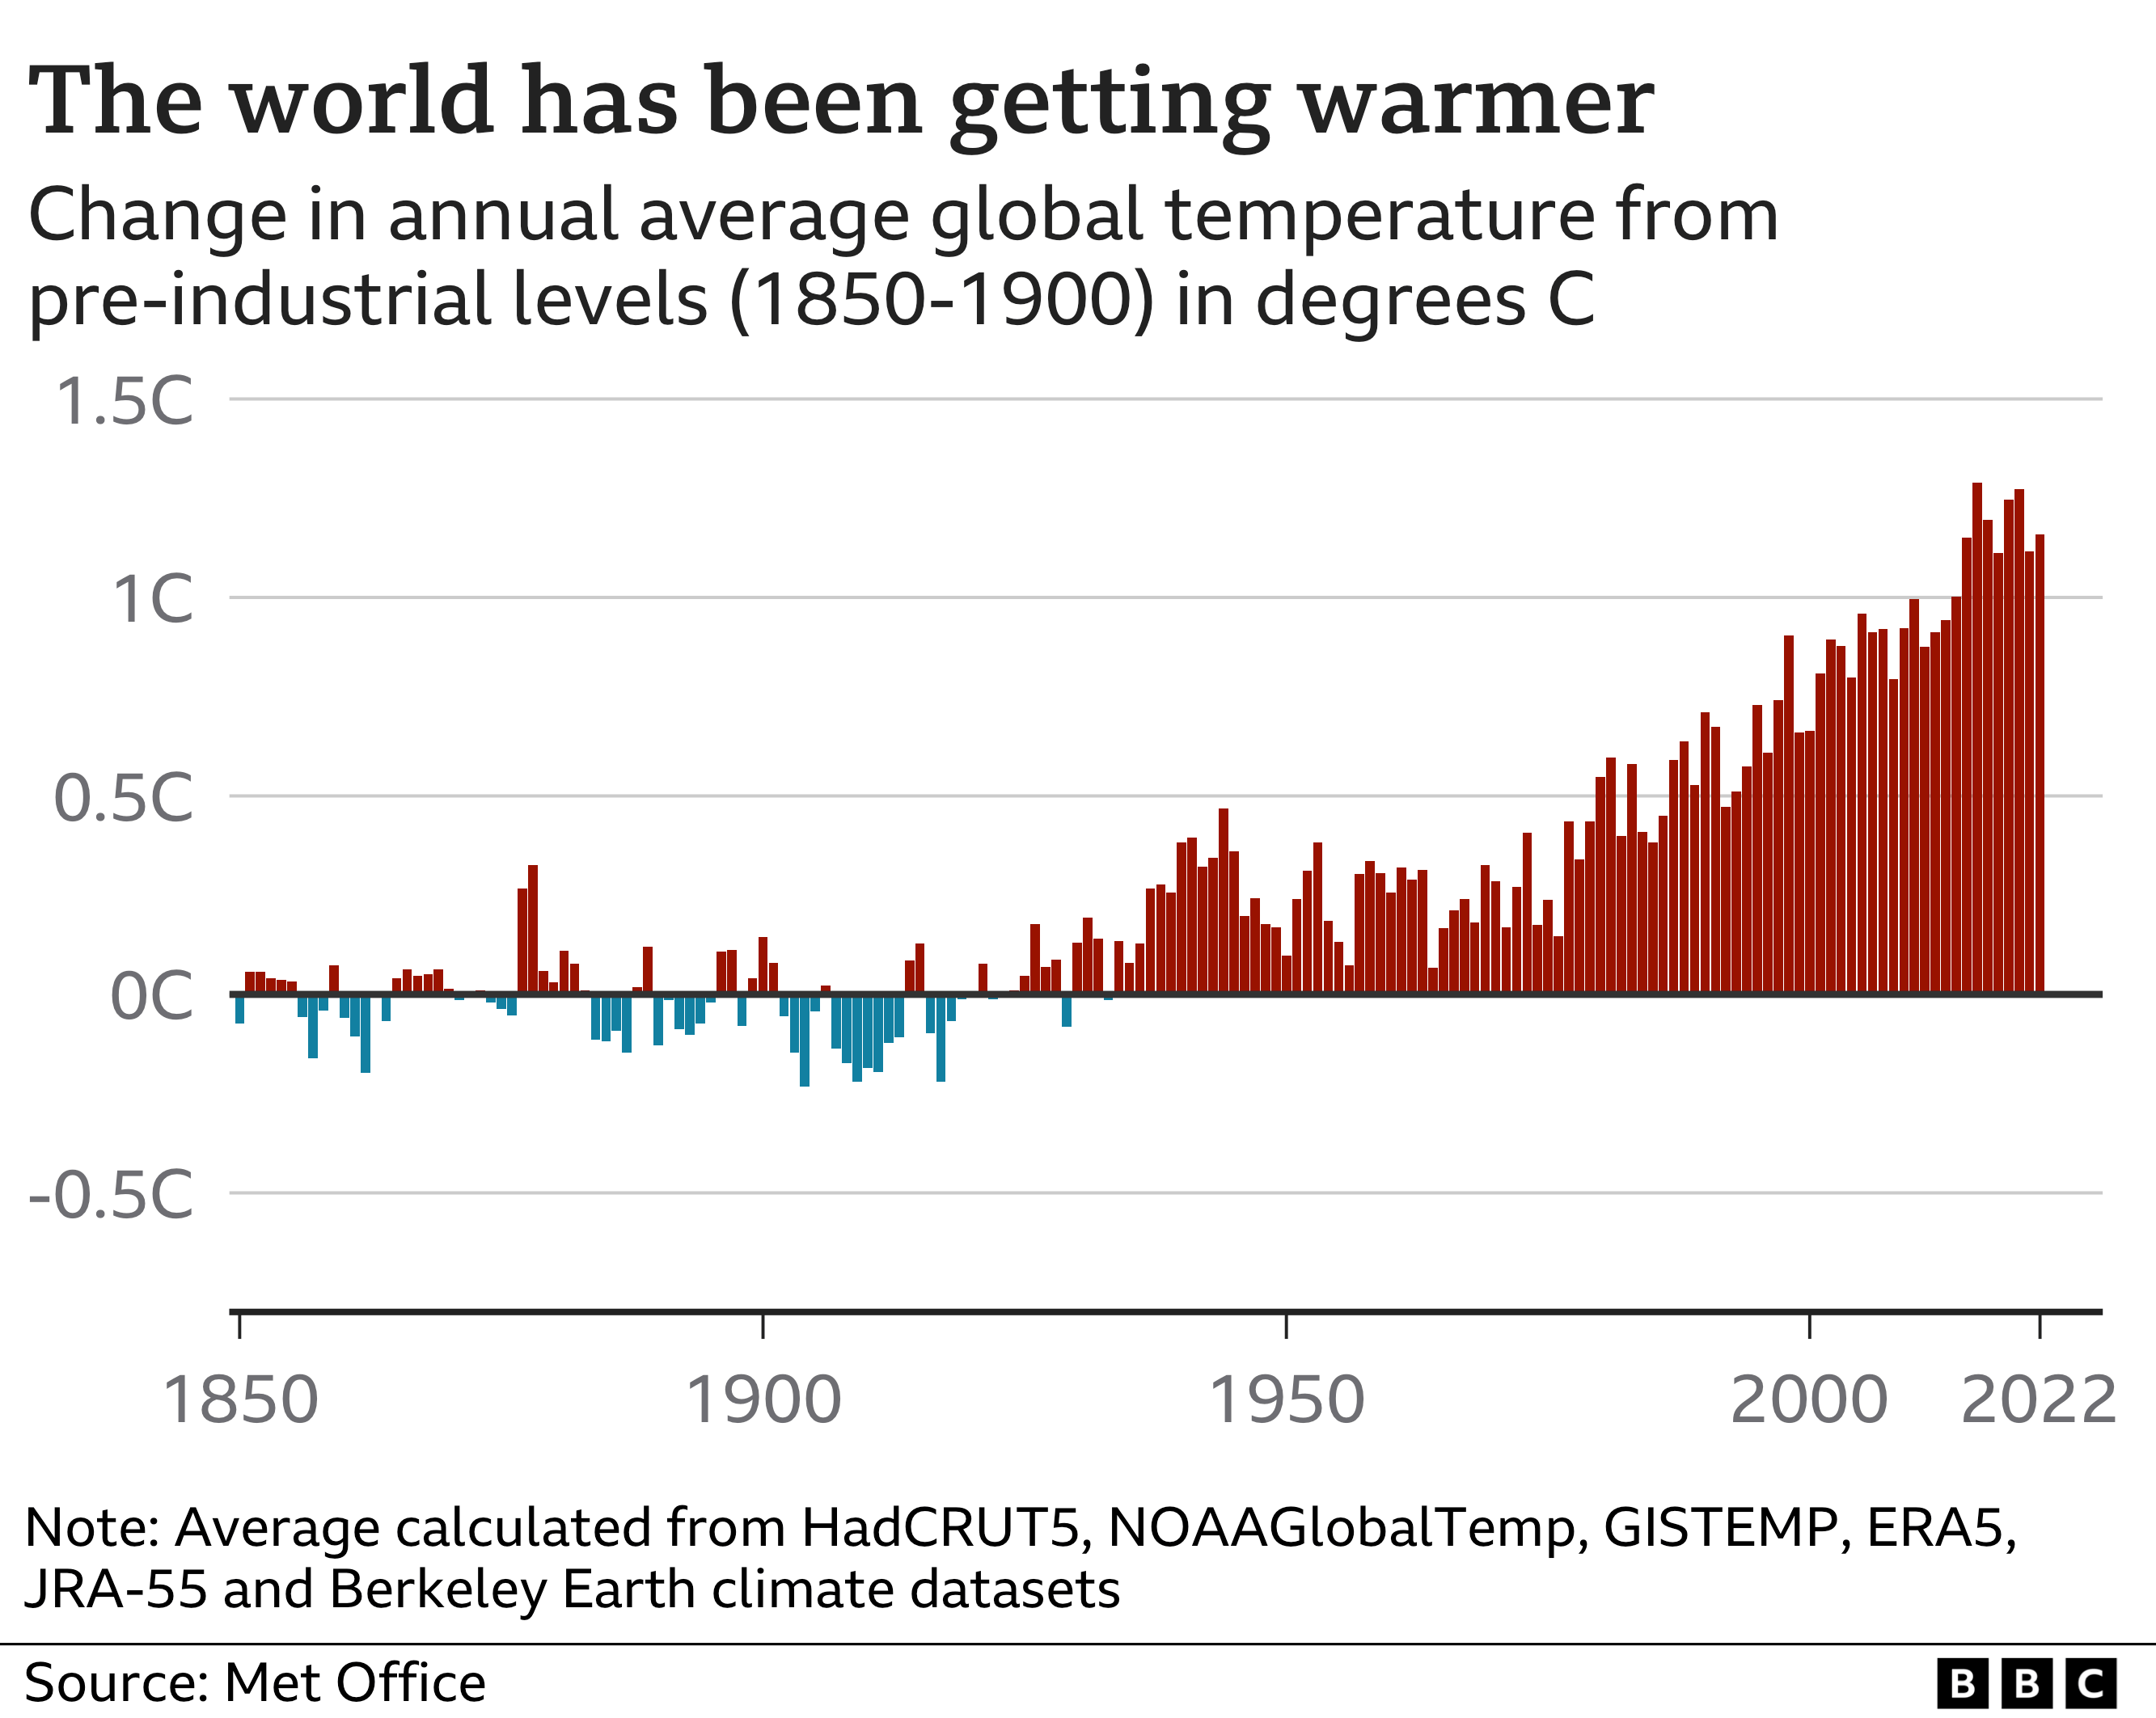 https://ichef.bbci.co.uk/news/640/cpsprodpb/843F/production/_129755833_avg_temp_change_chart-nc.png